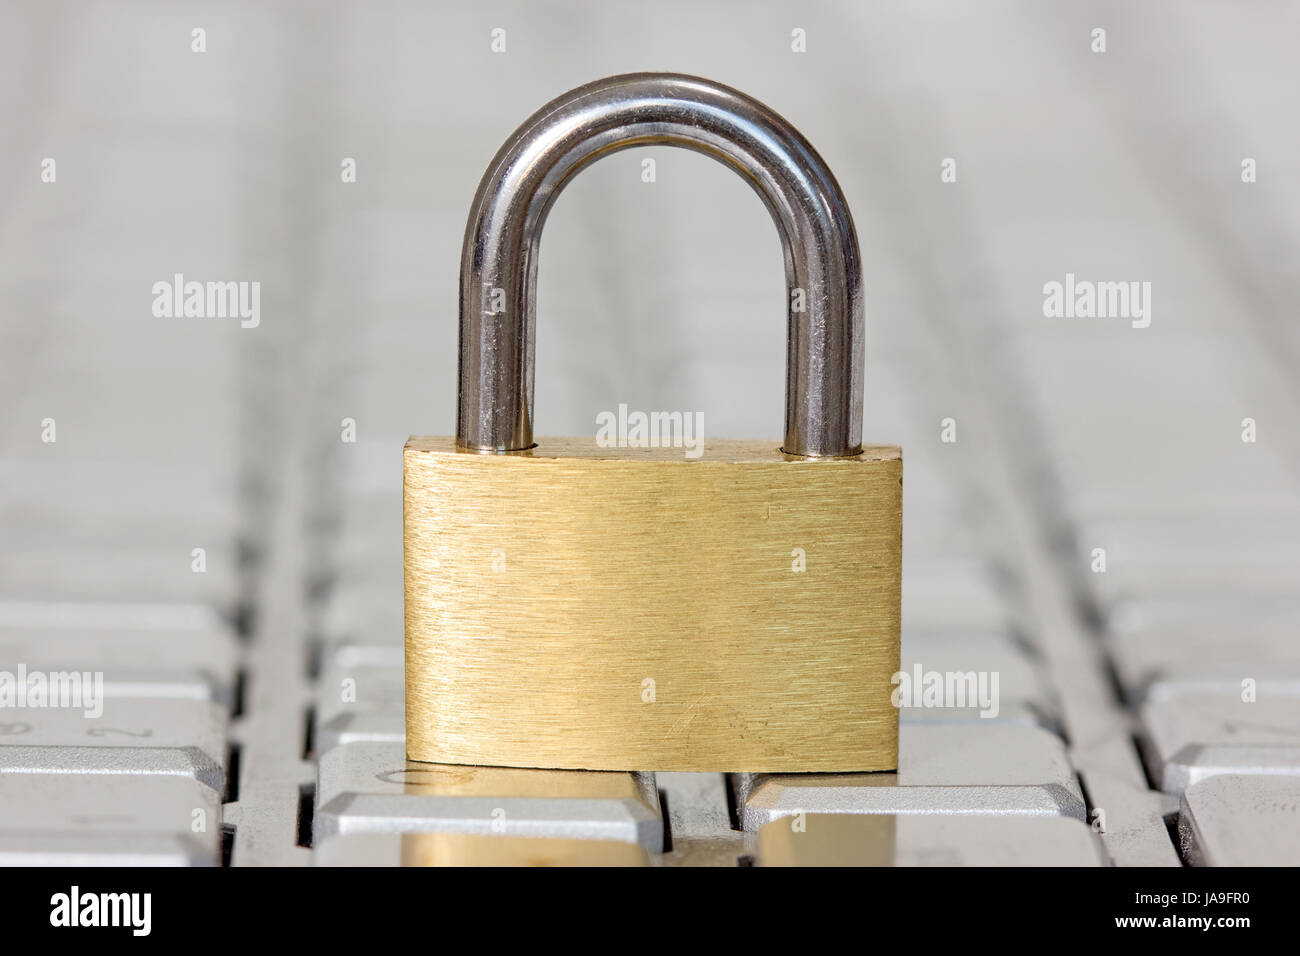 lock, keyboard, hardware, digital, protect, protection, security, safety, Stock Photo